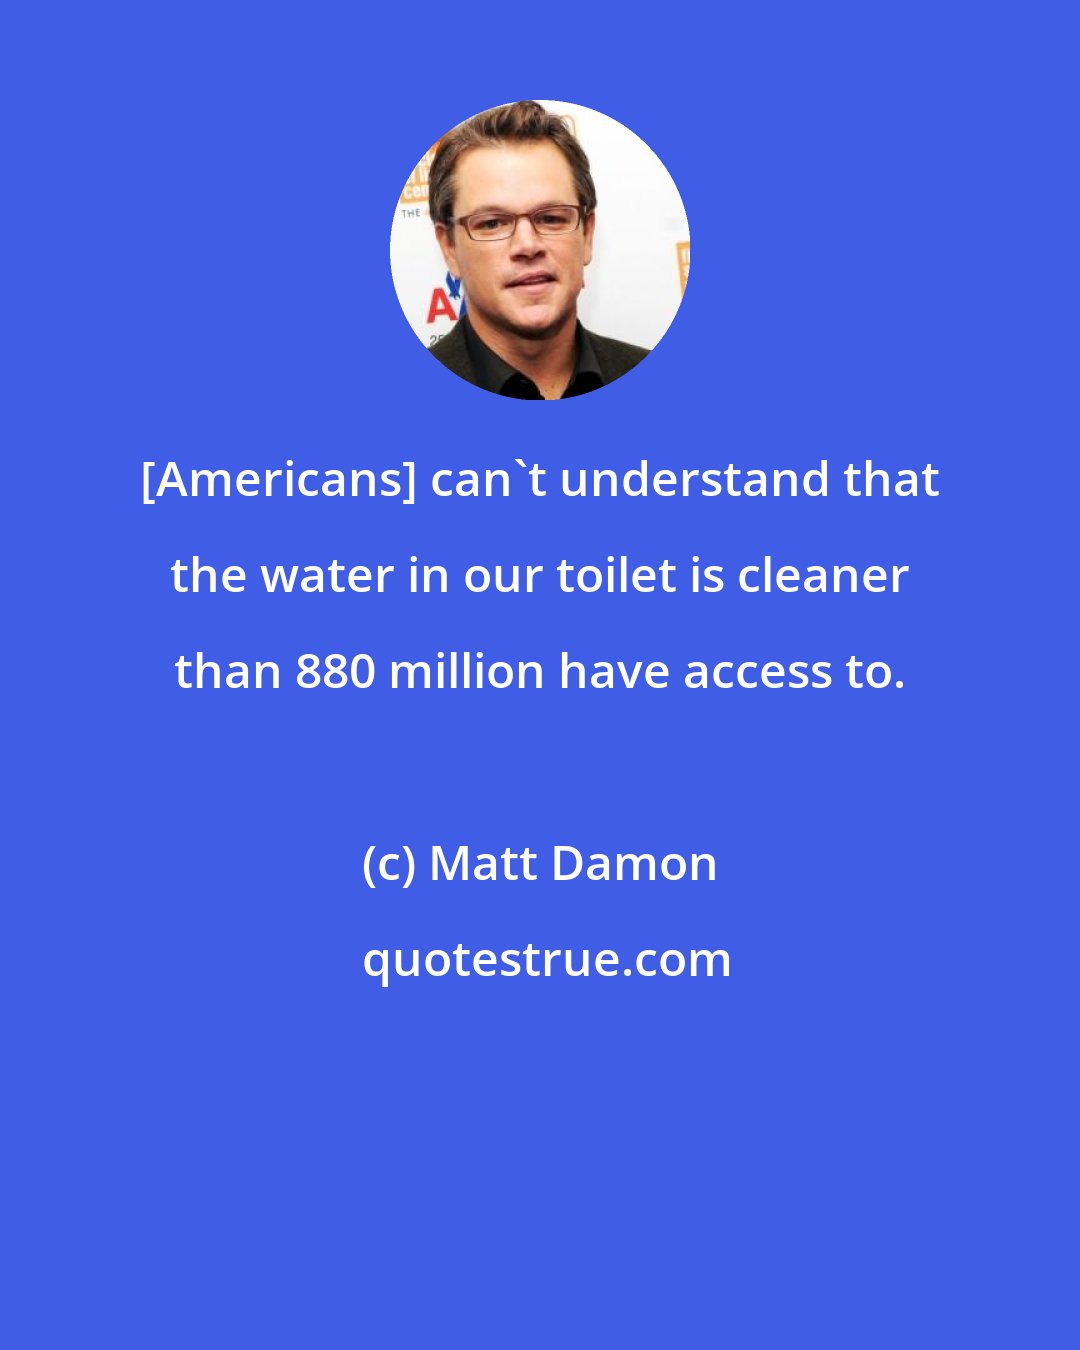 Matt Damon: [Americans] can't understand that the water in our toilet is cleaner than 880 million have access to.